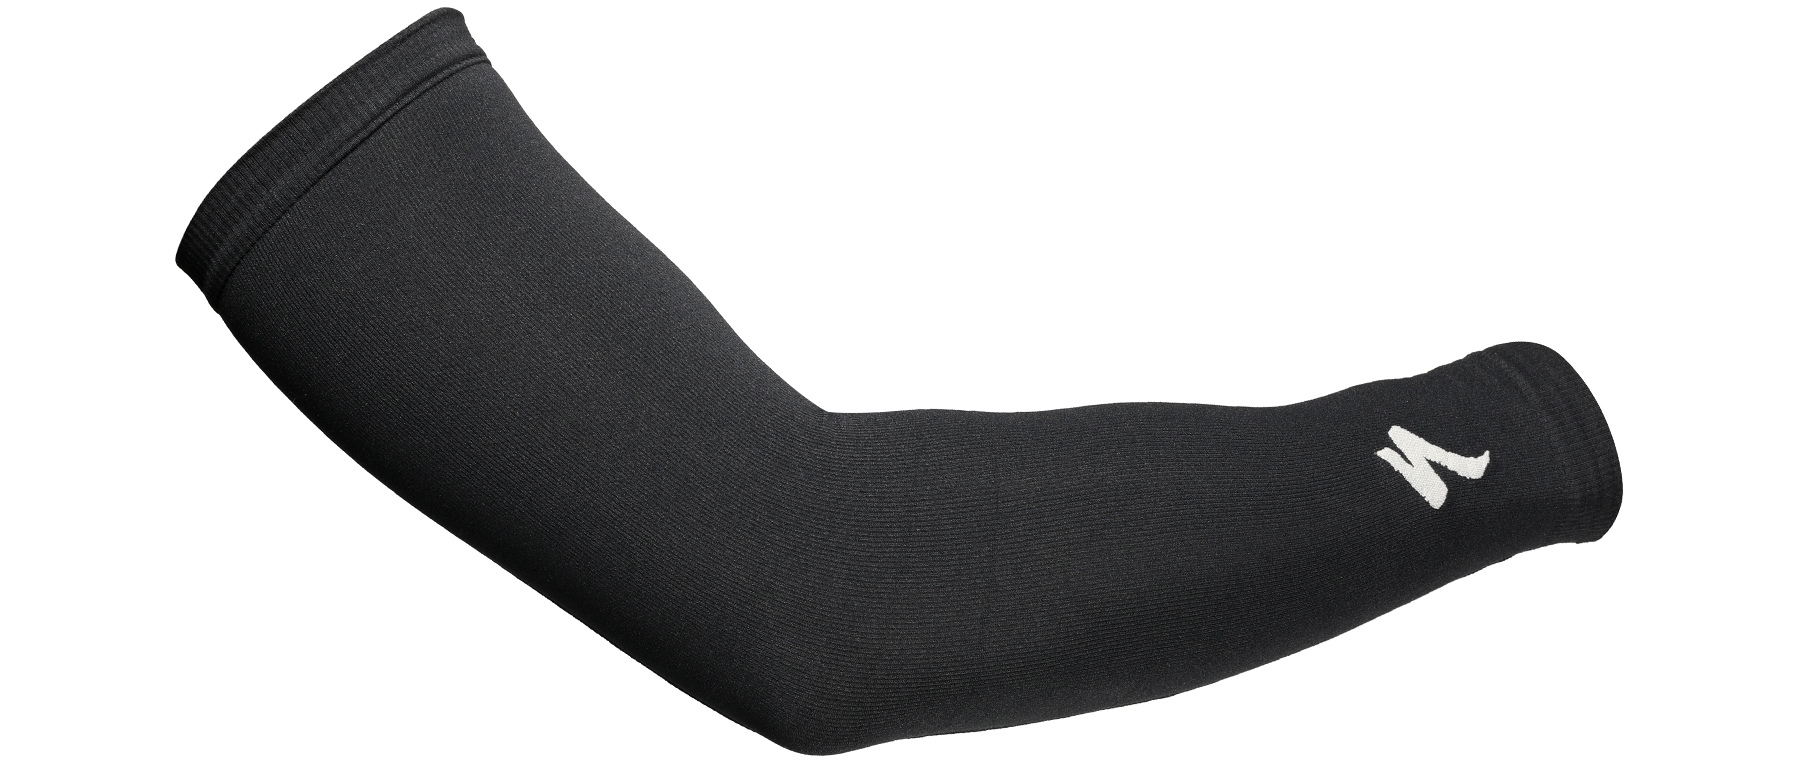 Specialized Deflect UV Arm Sleeves